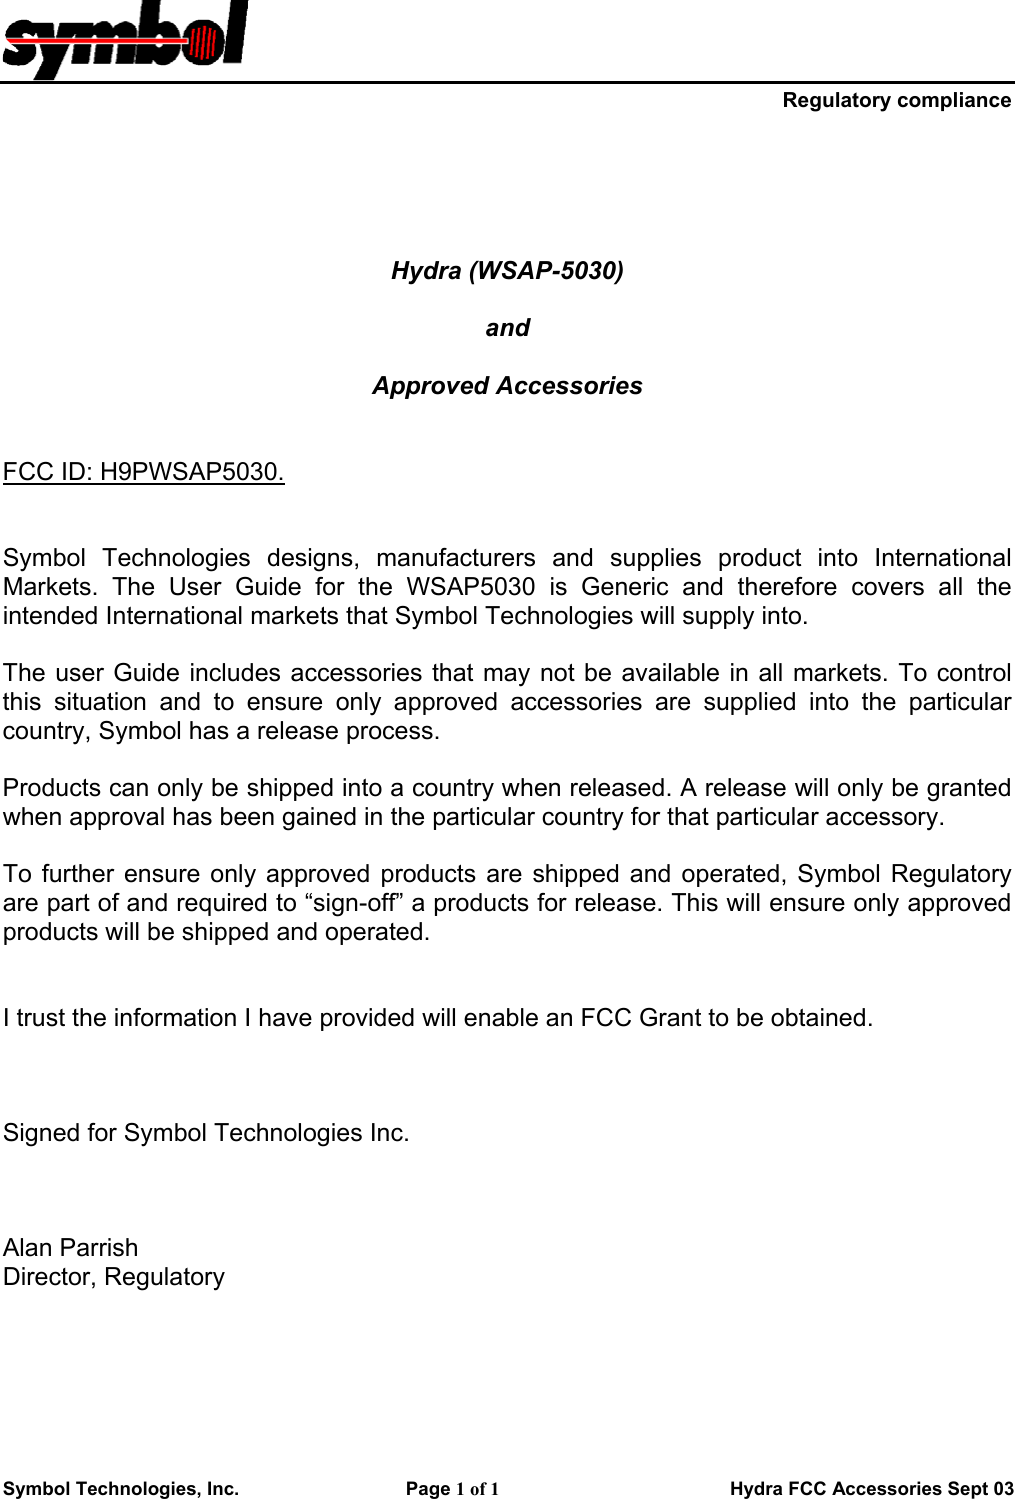     Regulatory compliance Symbol Technologies, Inc.    Page 1 of 1                        Hydra FCC Accessories Sept 03      Hydra (WSAP-5030)  and   Approved Accessories   FCC ID: H9PWSAP5030.   Symbol Technologies designs, manufacturers and supplies product into International Markets. The User Guide for the WSAP5030 is Generic and therefore covers all the intended International markets that Symbol Technologies will supply into.  The user Guide includes accessories that may not be available in all markets. To control this situation and to ensure only approved accessories are supplied into the particular country, Symbol has a release process.   Products can only be shipped into a country when released. A release will only be granted when approval has been gained in the particular country for that particular accessory.  To further ensure only approved products are shipped and operated, Symbol Regulatory are part of and required to “sign-off” a products for release. This will ensure only approved products will be shipped and operated.    I trust the information I have provided will enable an FCC Grant to be obtained.    Signed for Symbol Technologies Inc.     Alan Parrish Director, Regulatory     